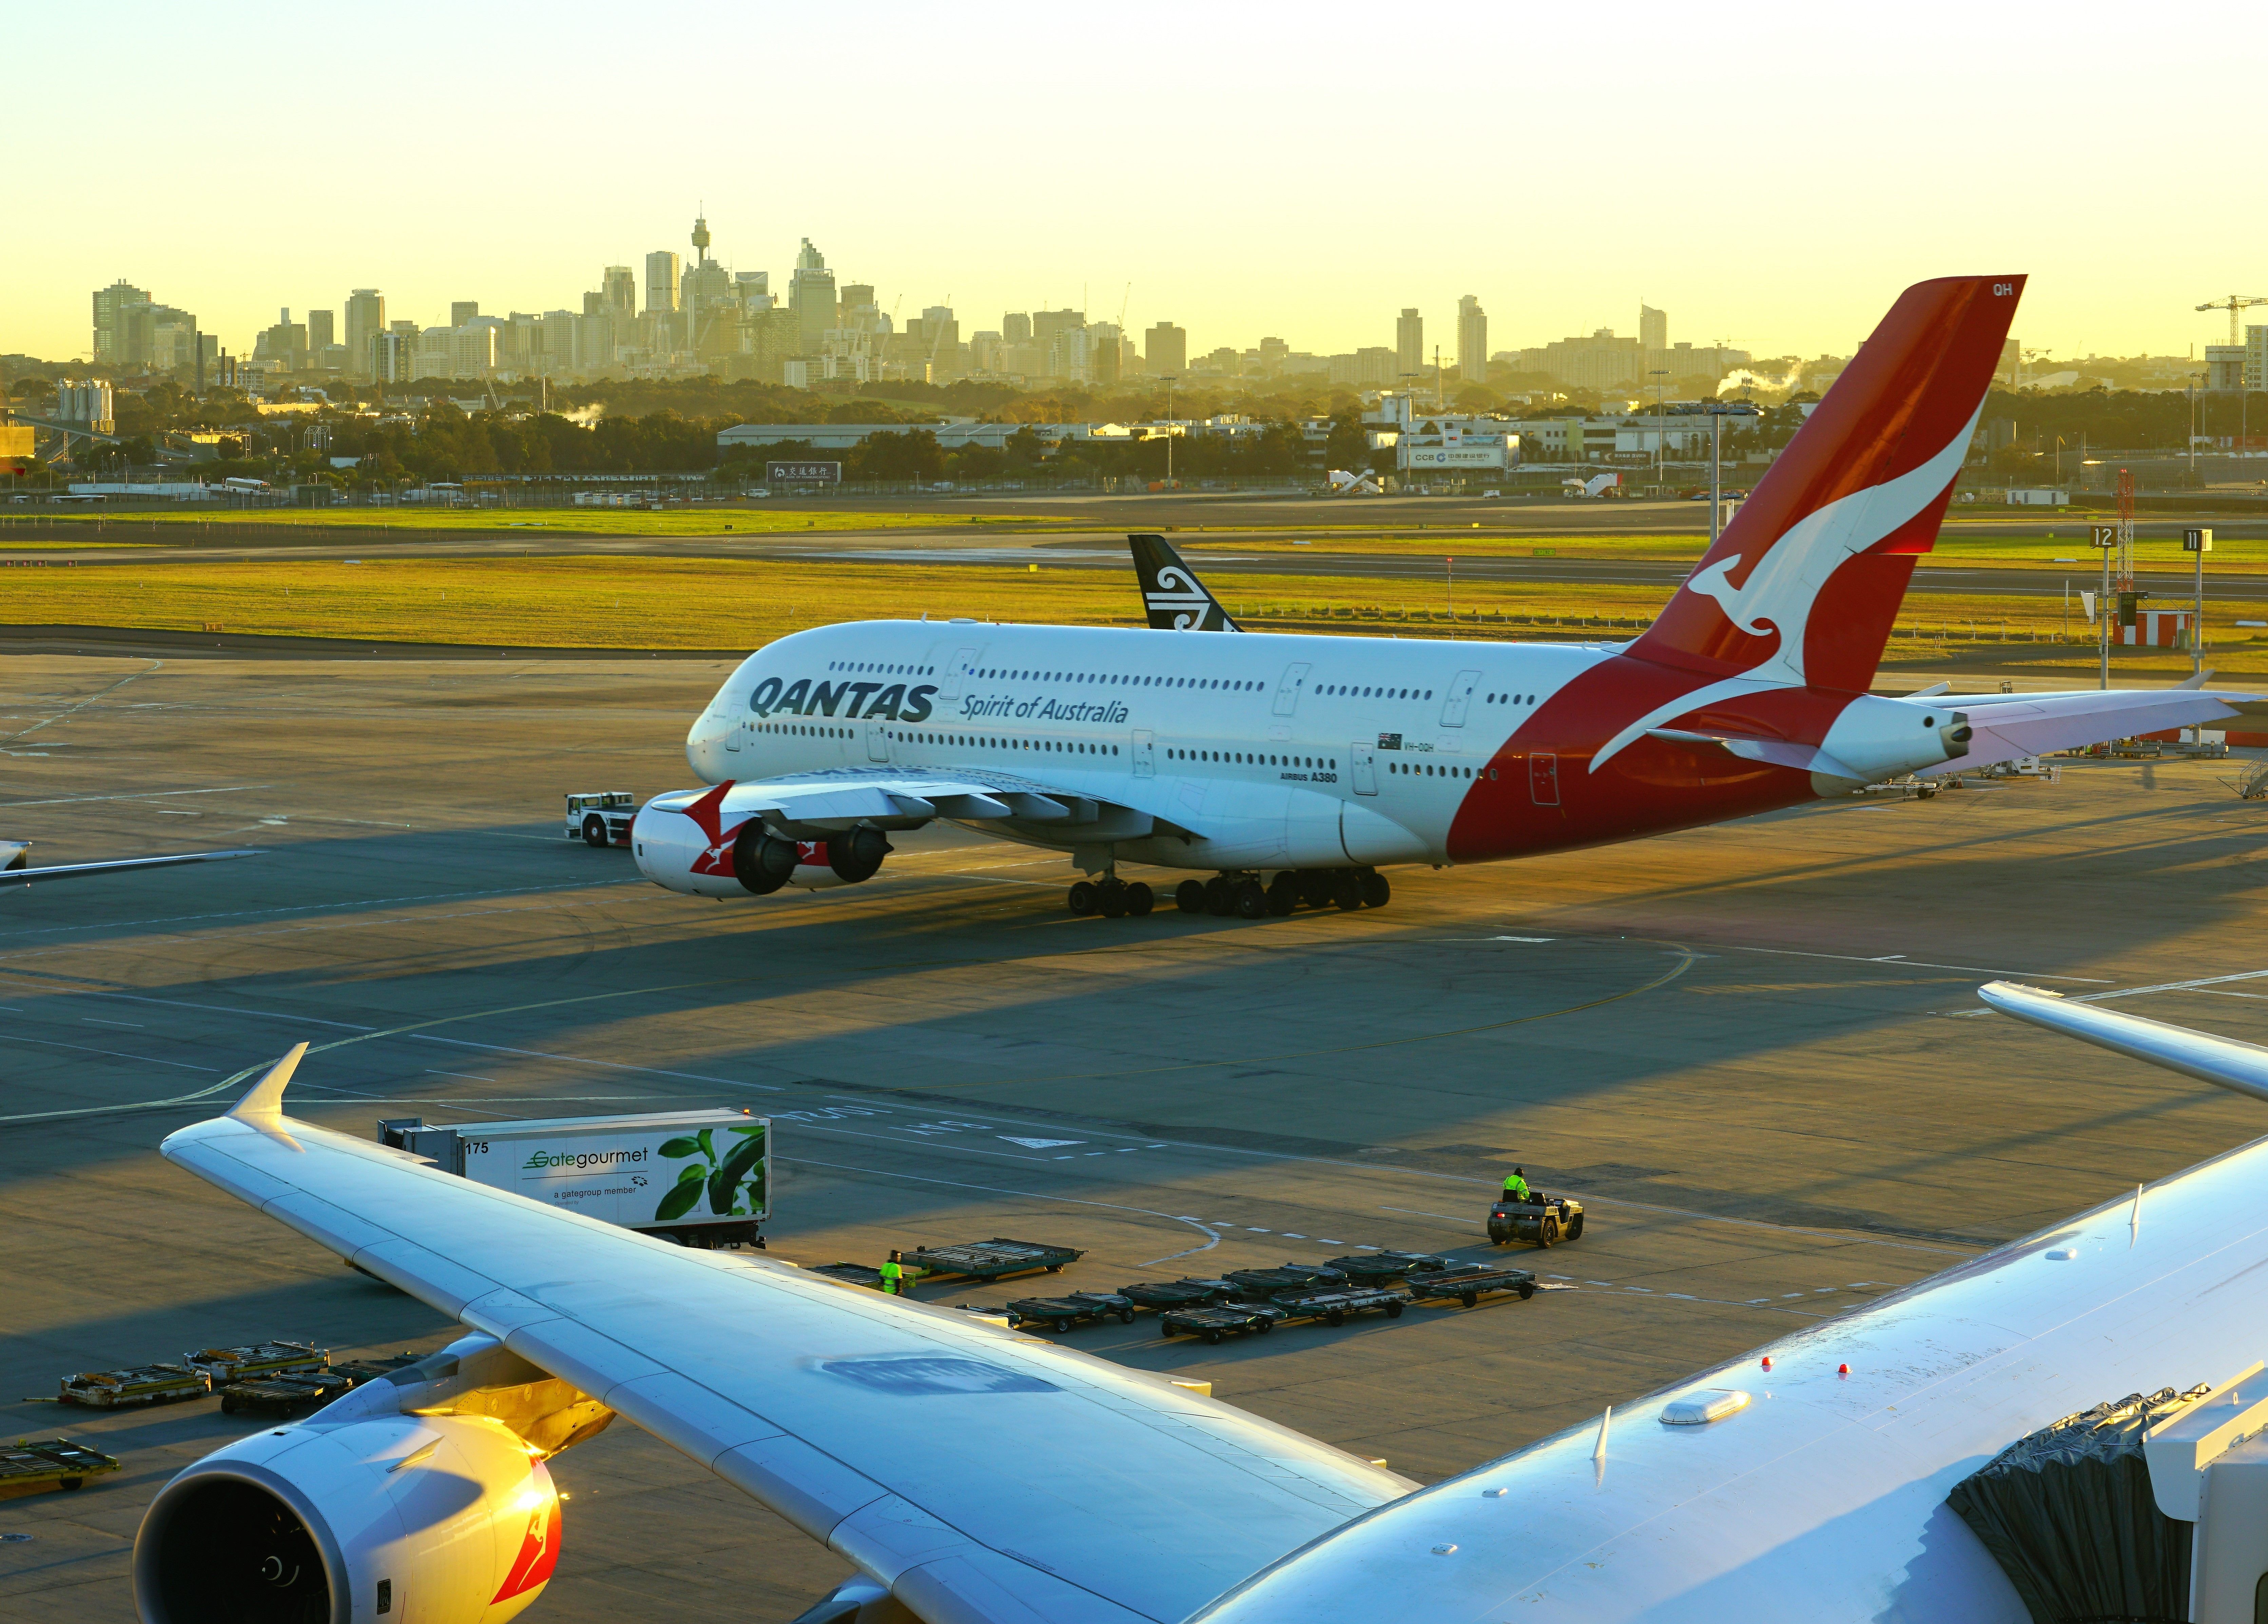 A Qantas Airbus A380 being pushed by a truck on an airport apron.